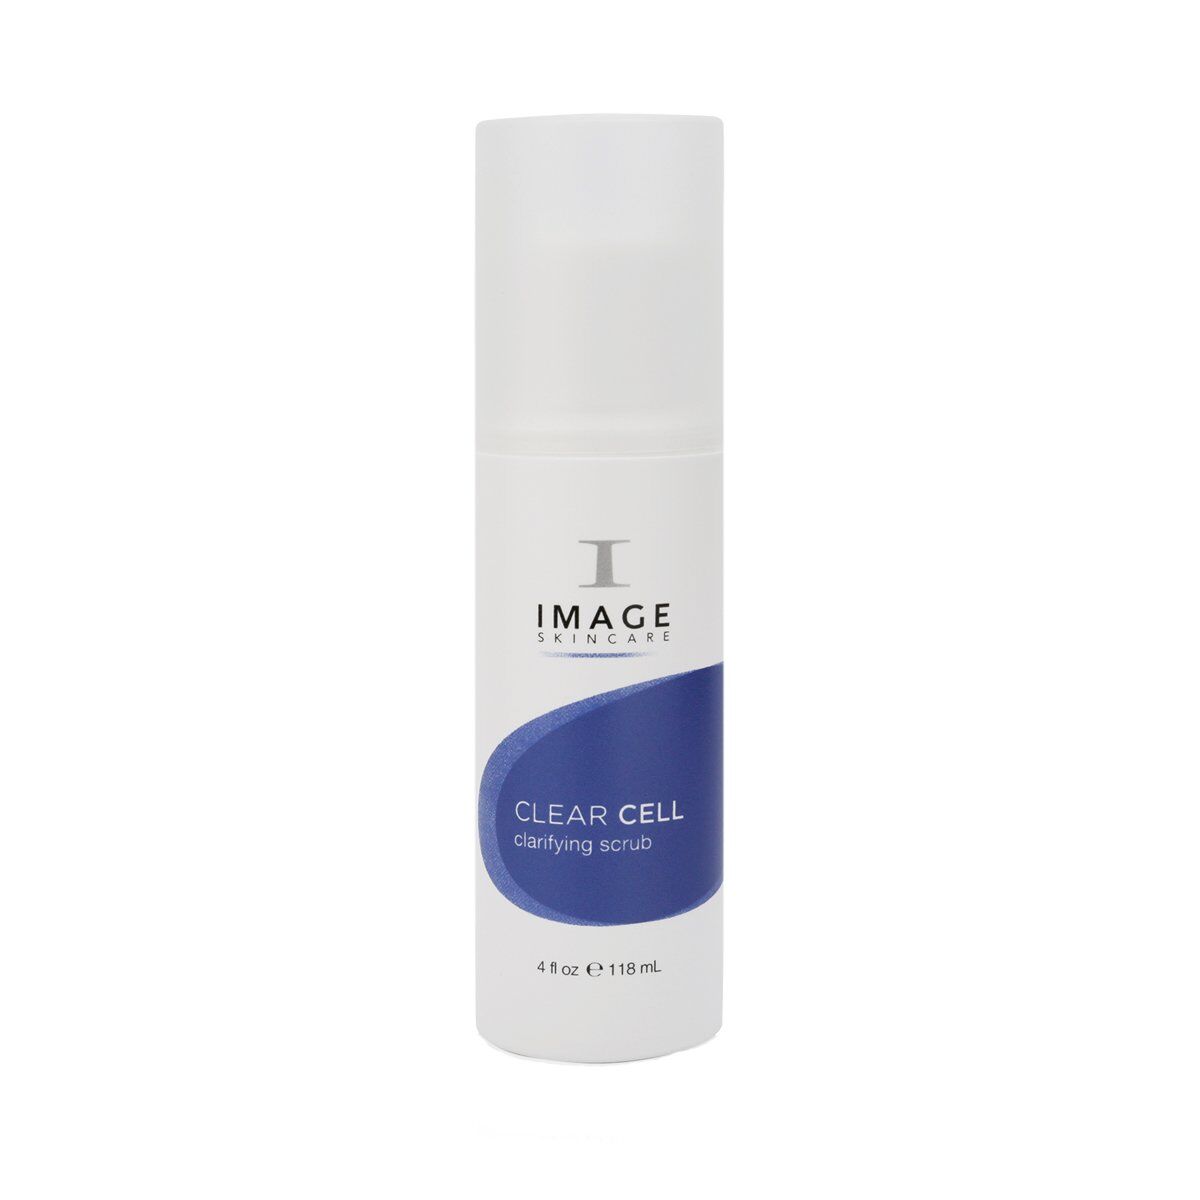 Image skincare - Clear Cell Clarifying Scrub